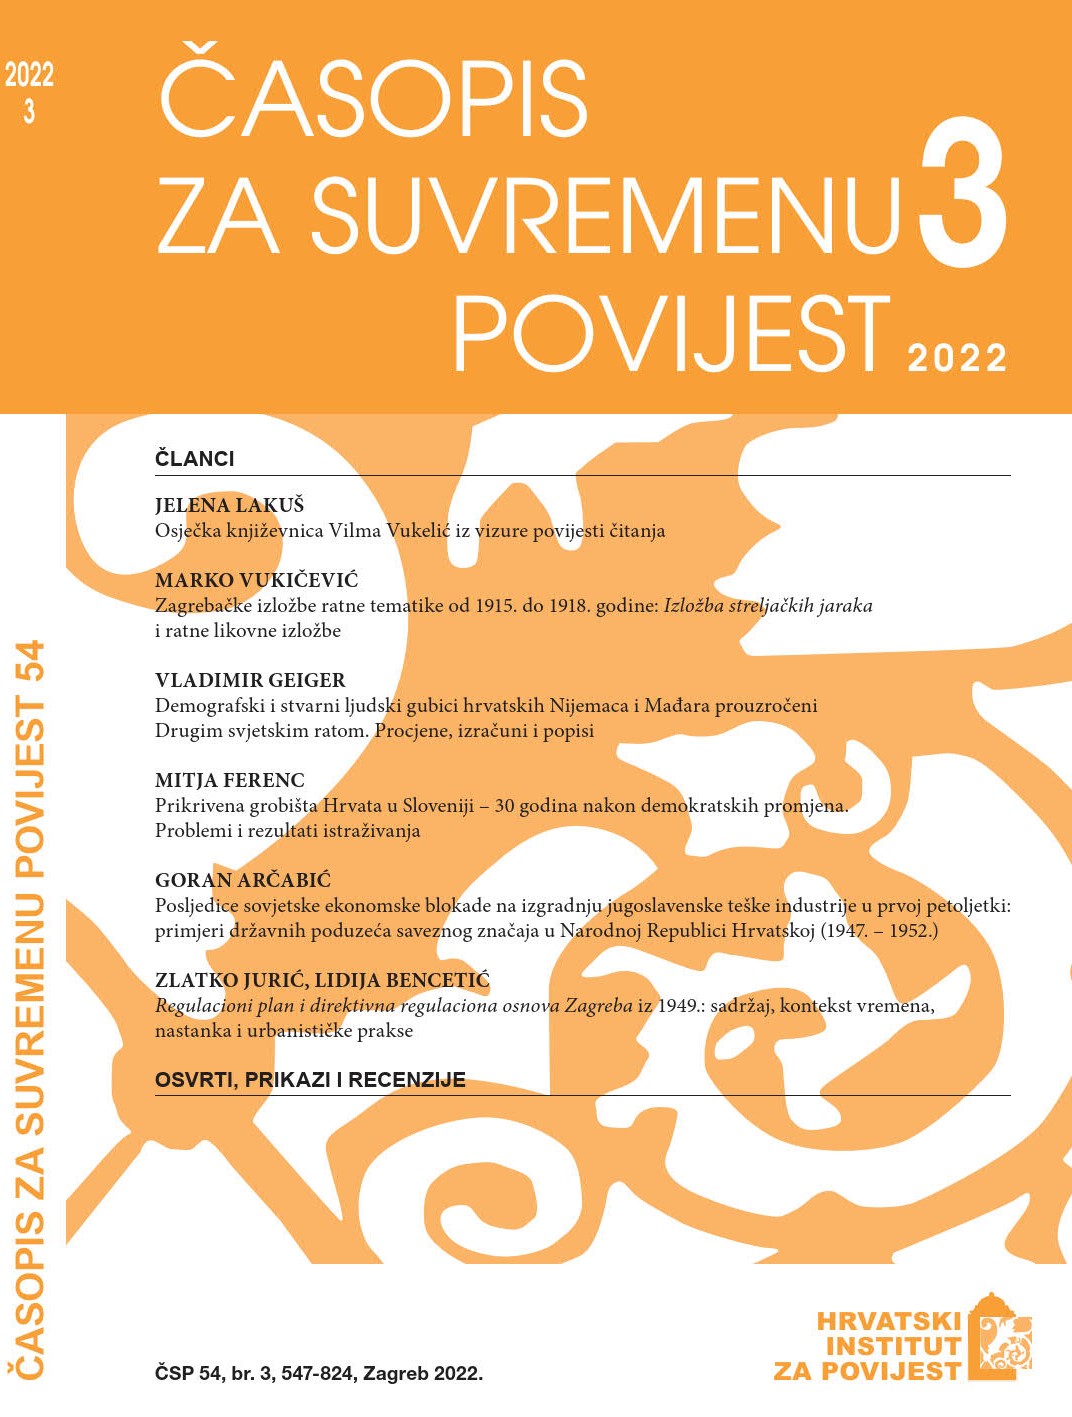 The Urban Regulatory Plan and Directive Regulatory Basis of Zagreb of 1949: Its Content and Temporal, Creation, and Urban Planning Practice Context Cover Image